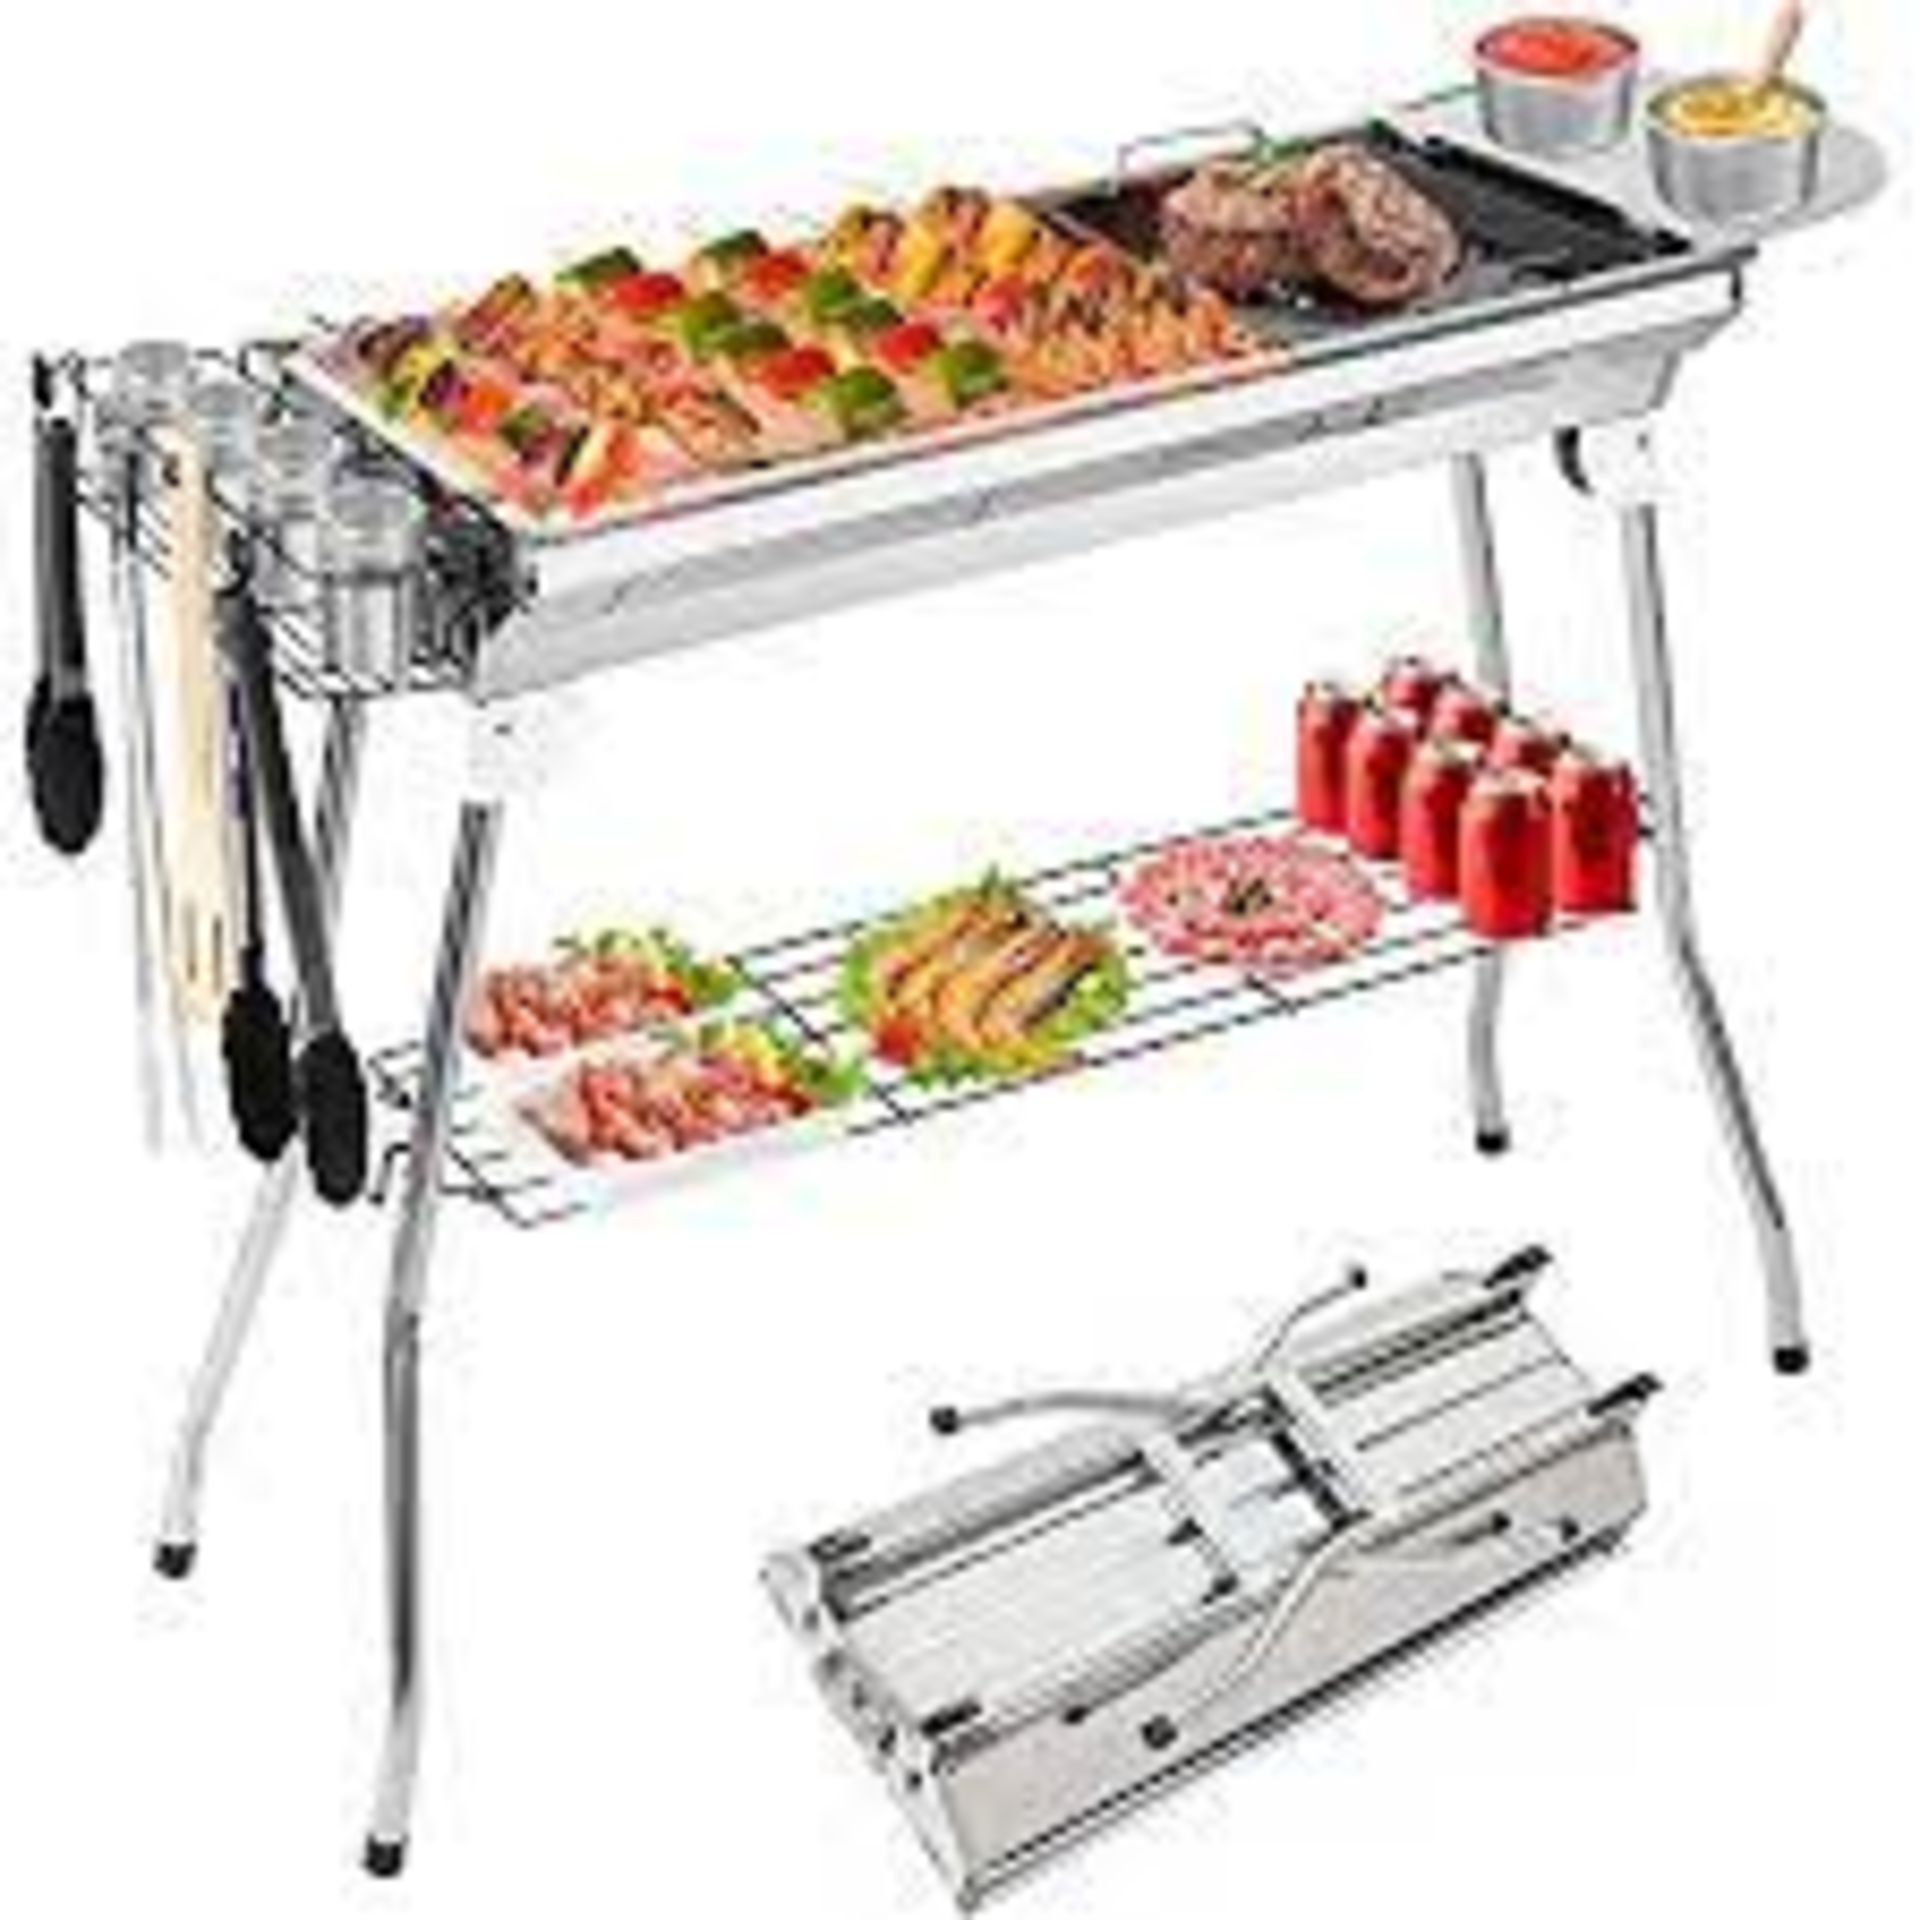 PALLET TO INCLUDE 10 X BRAND NEW LARGE BBQ GRILL WITH UNDER STORAGE SHELF RRP £220